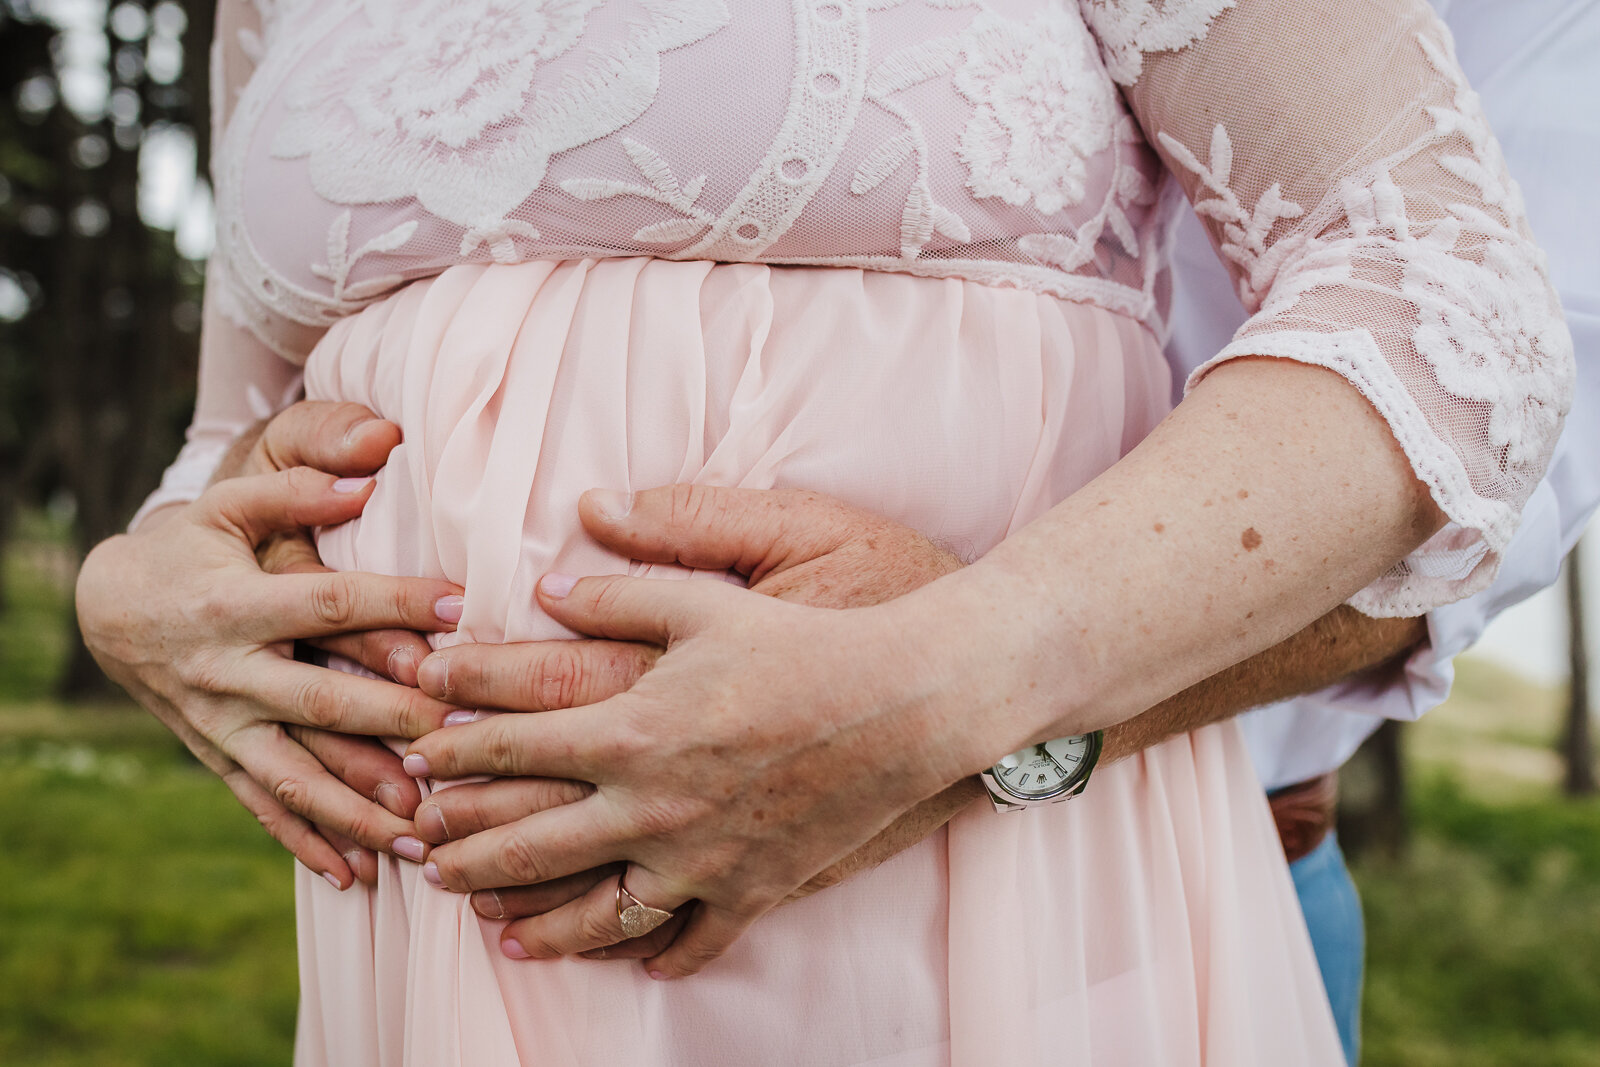 wife and partner's hands on pregnant belly - Bay Area Maternity Photographer